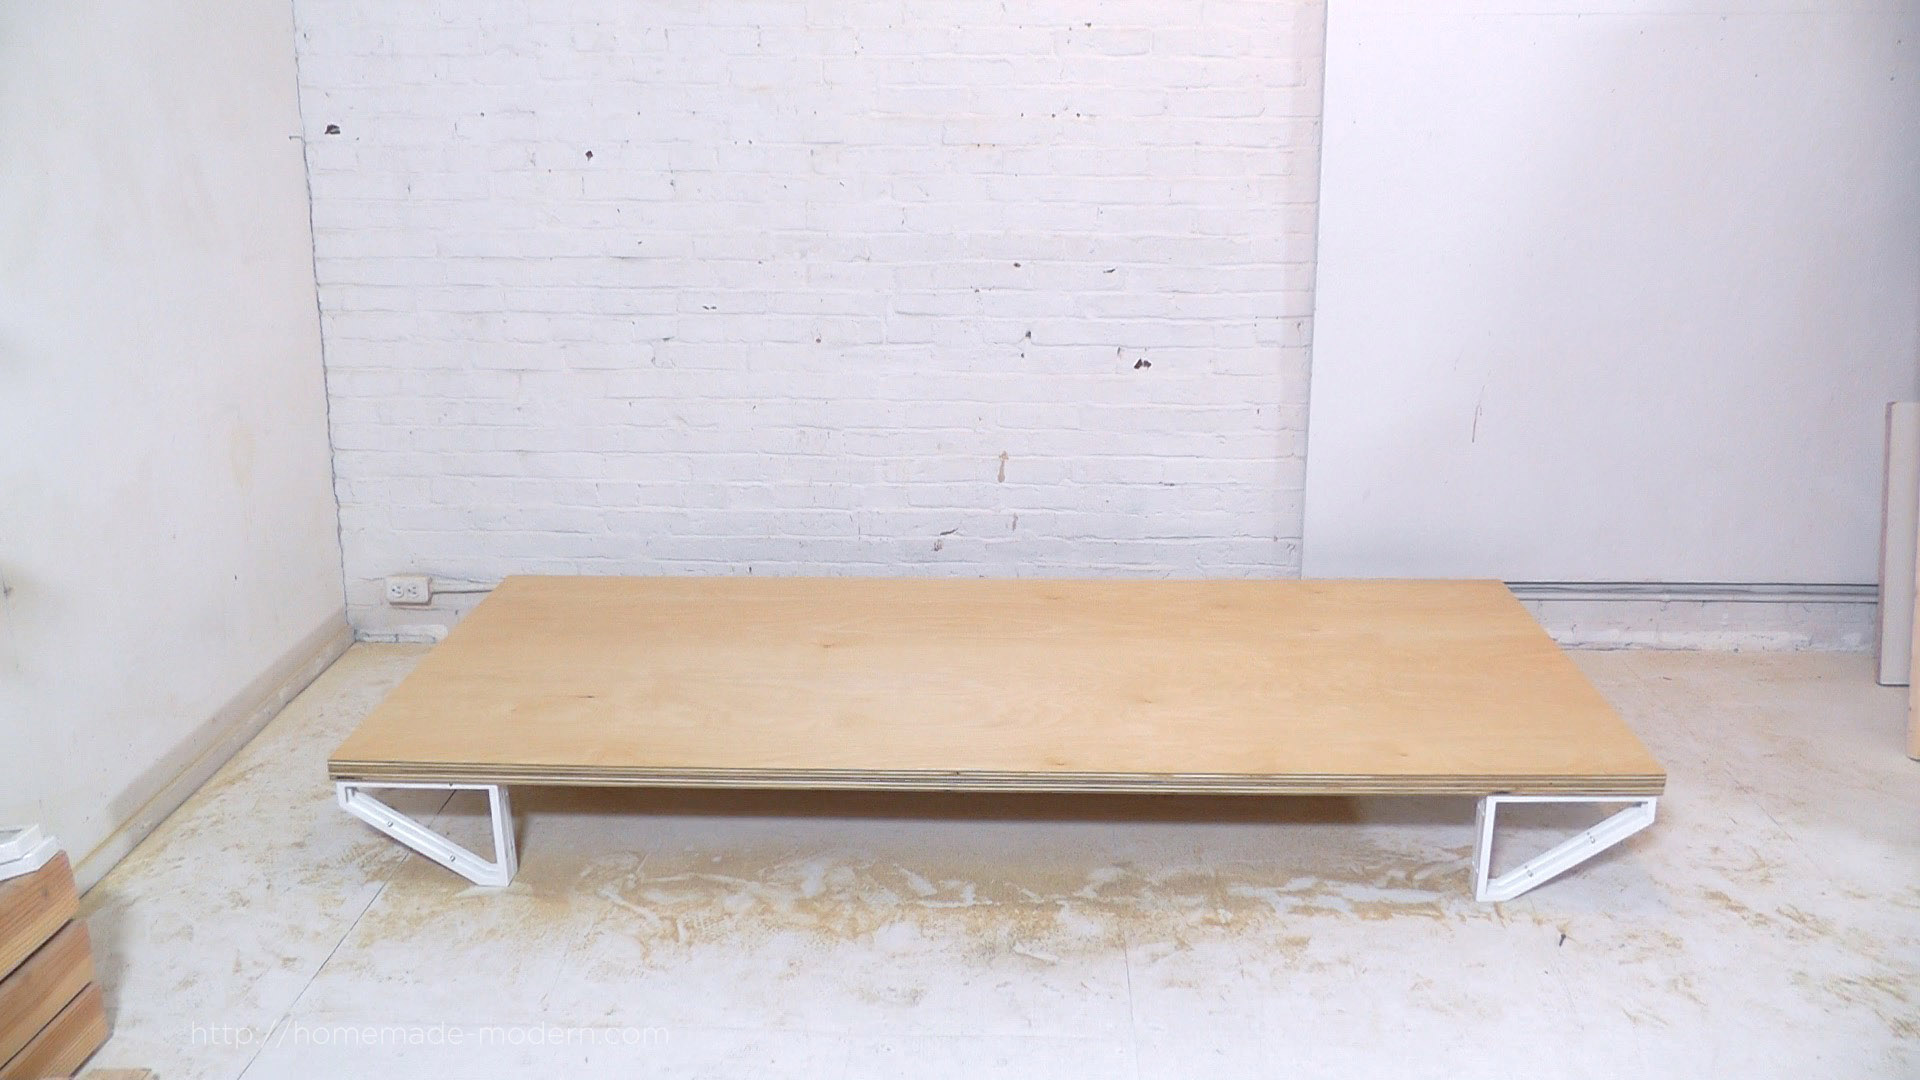 This DIY Modern Bed is made from a sheet of ¾” plywood, and 10 ikea shelf brackets. The materials cost  less than $100 and only 3 power tools are needed to build it. Full instructions can be found at HomeMade-Modern.com.